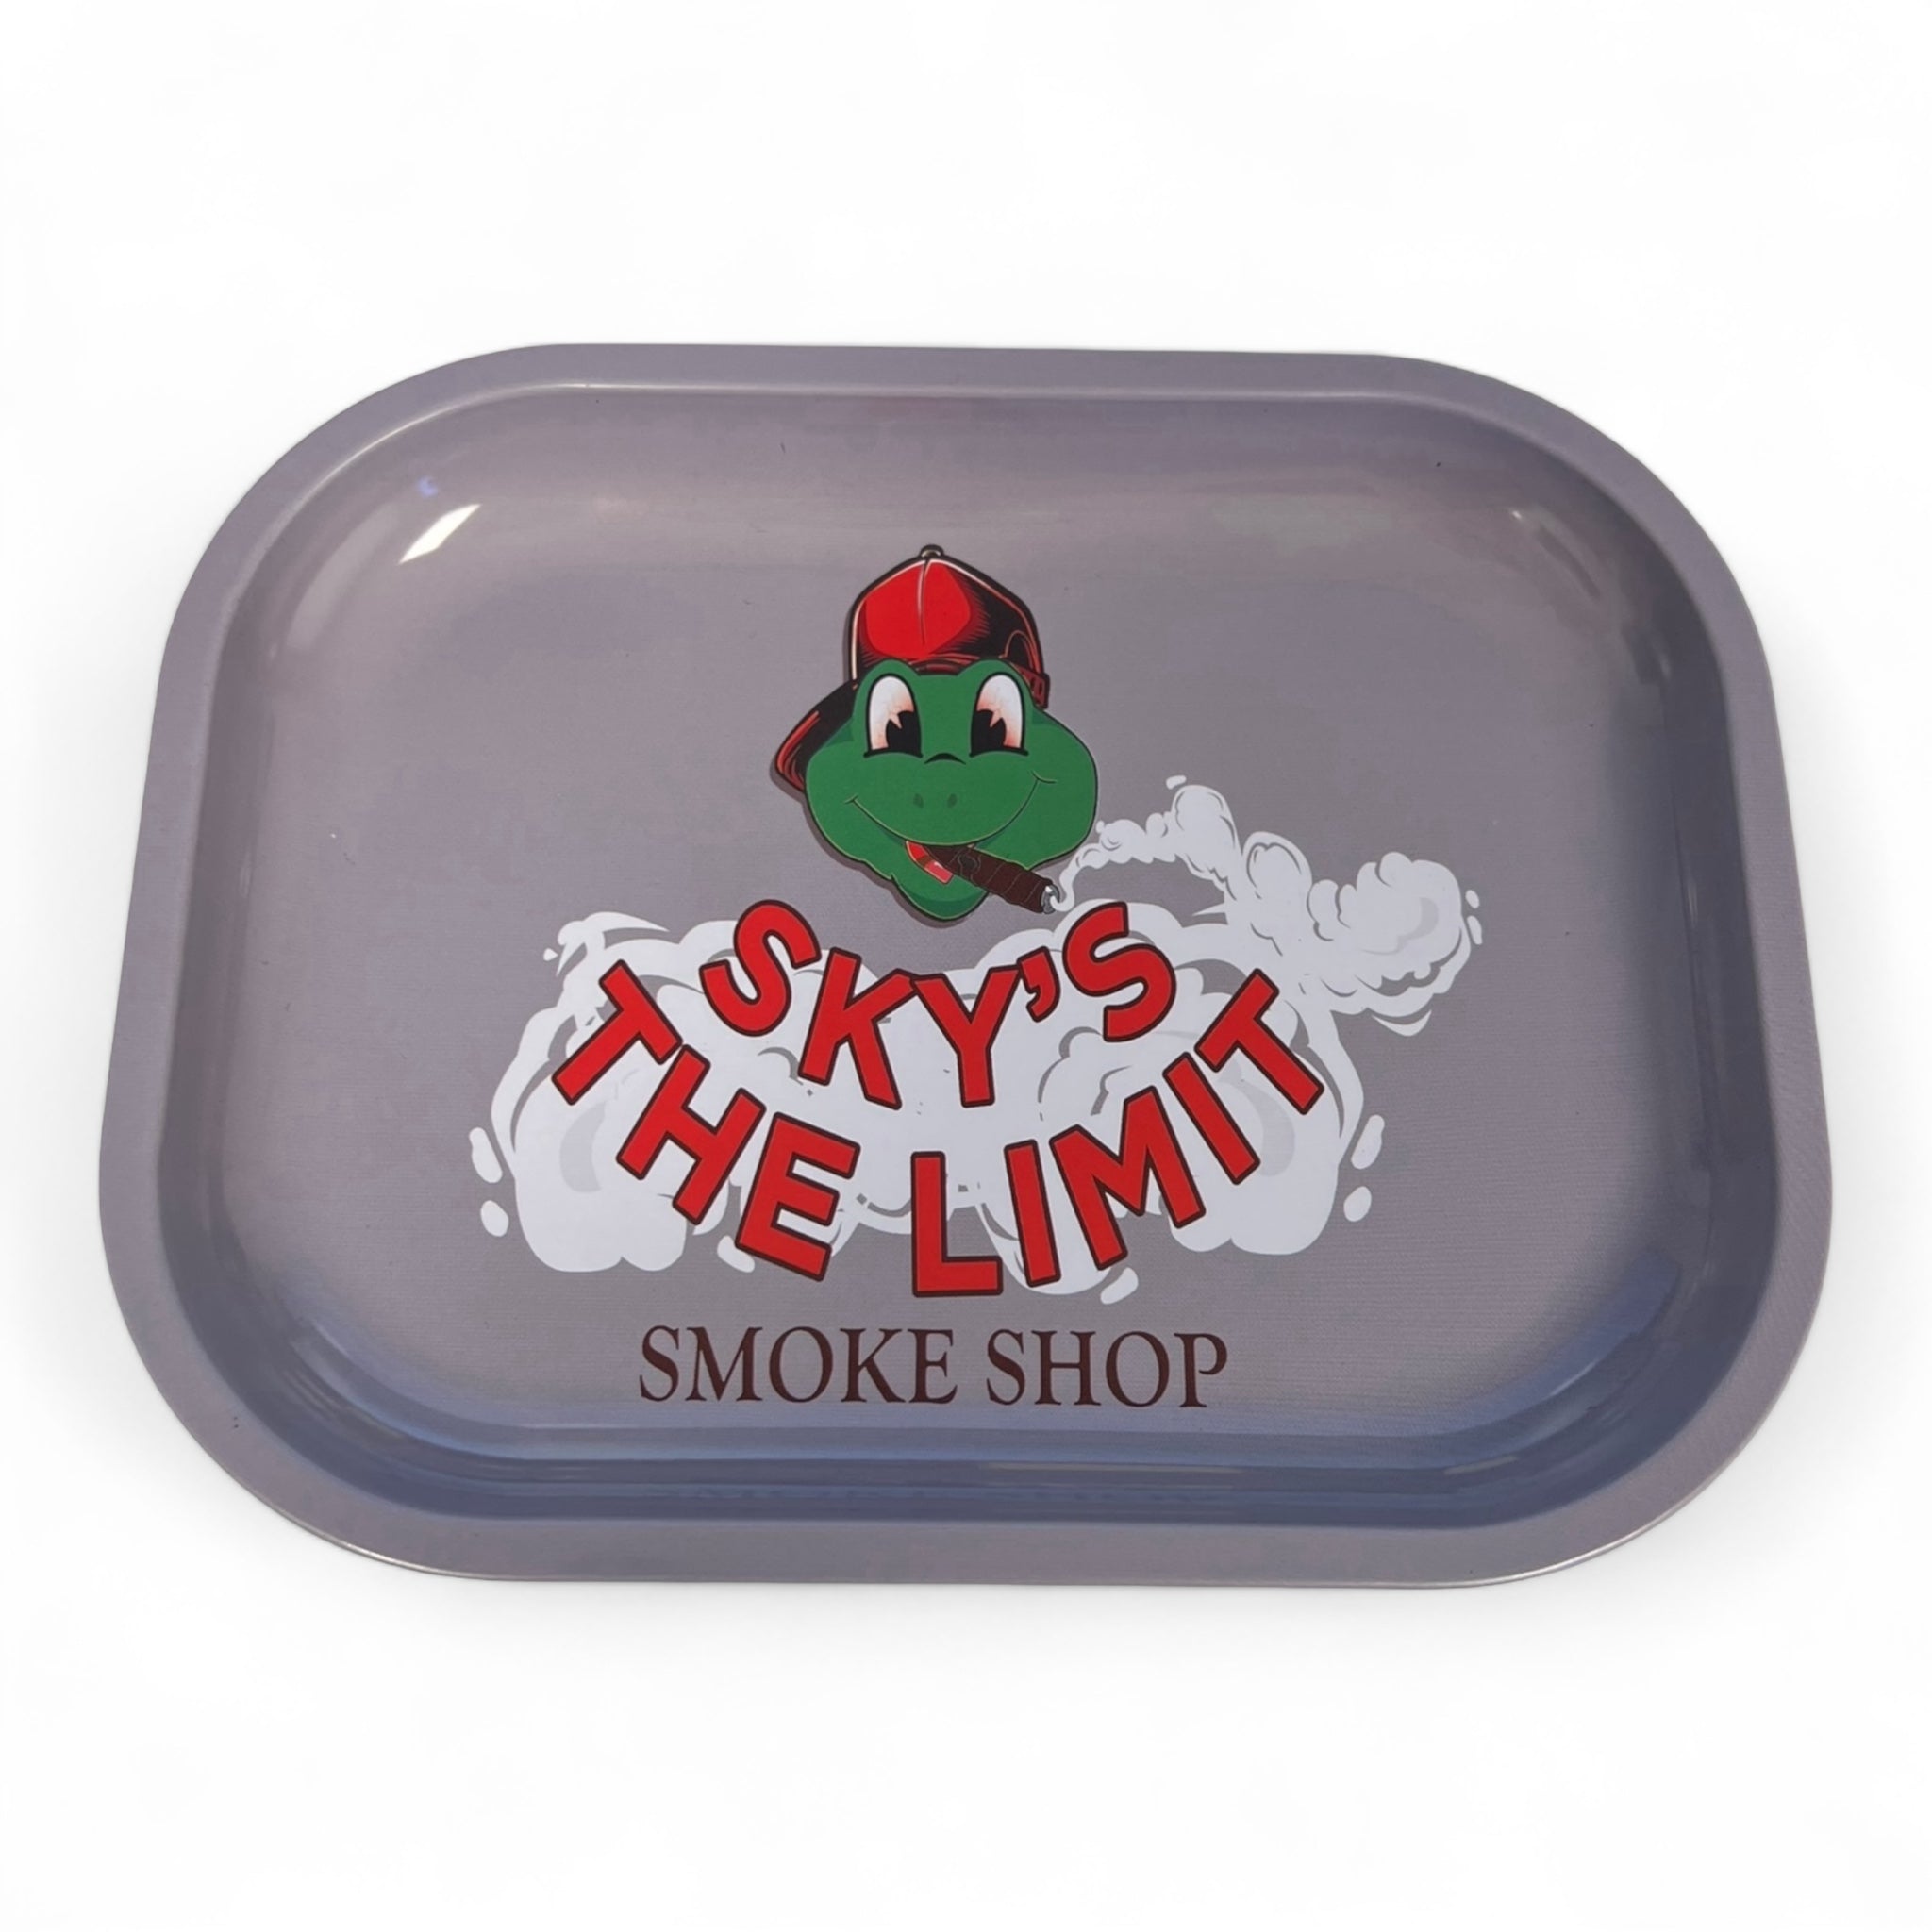 Rolling Tray 7x5.5 Sky's the Limit/High Quality Premium Metal Tray